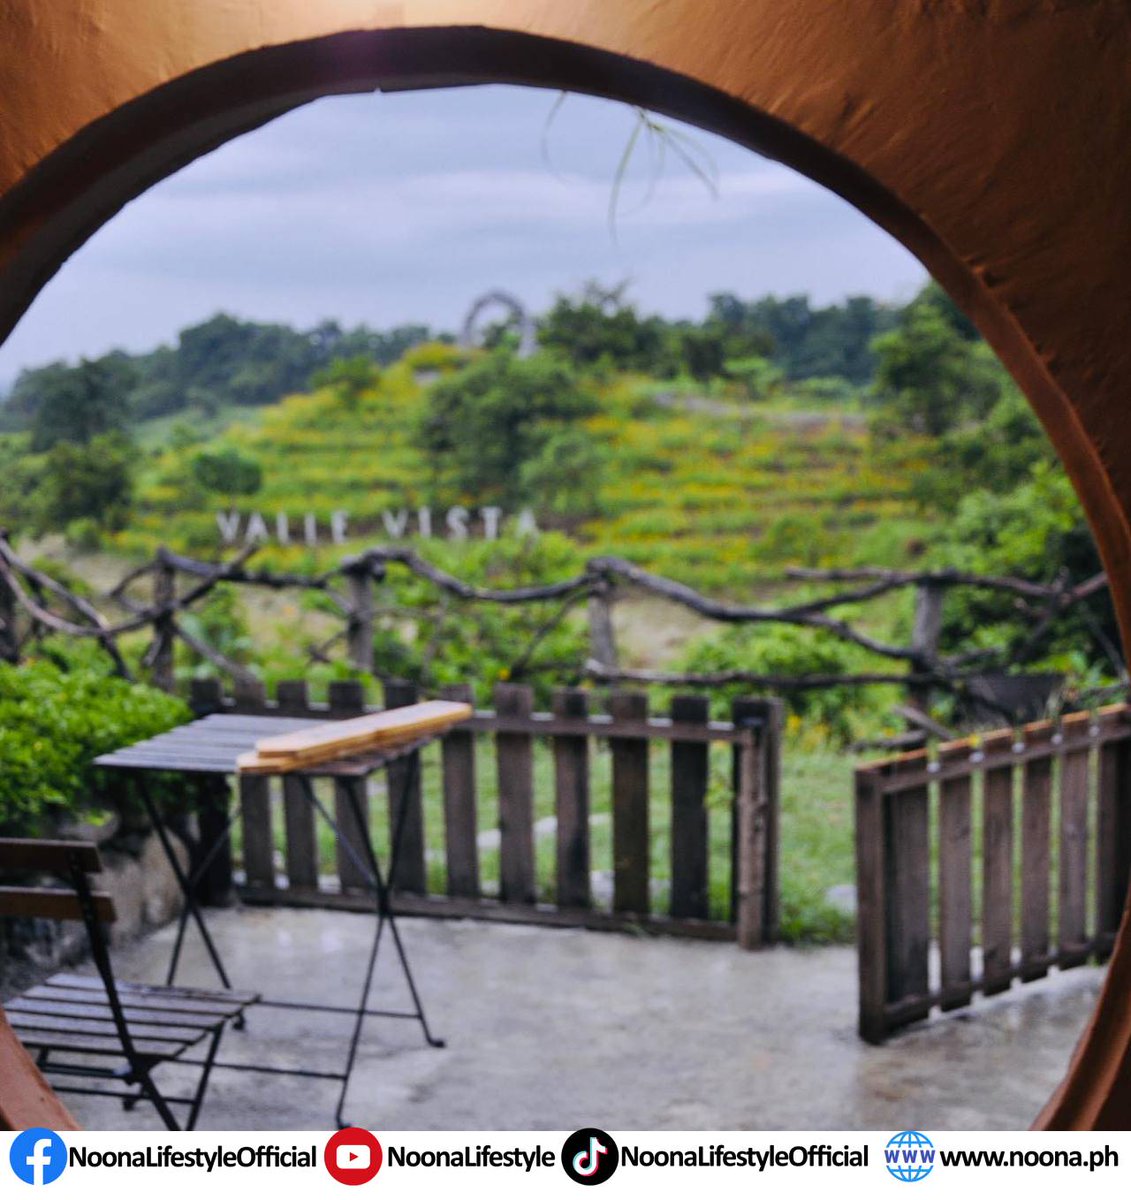 Noona Lifestyle | Vacation Home Rental

a calm campground that blends the whimsicalness of hobbit dwellings with the splendor of the natural world.

Valle Vista Hills

#noonalifestyle #noonaph #noonaphilippines #noonasports #hobbithouse #glamping #camping